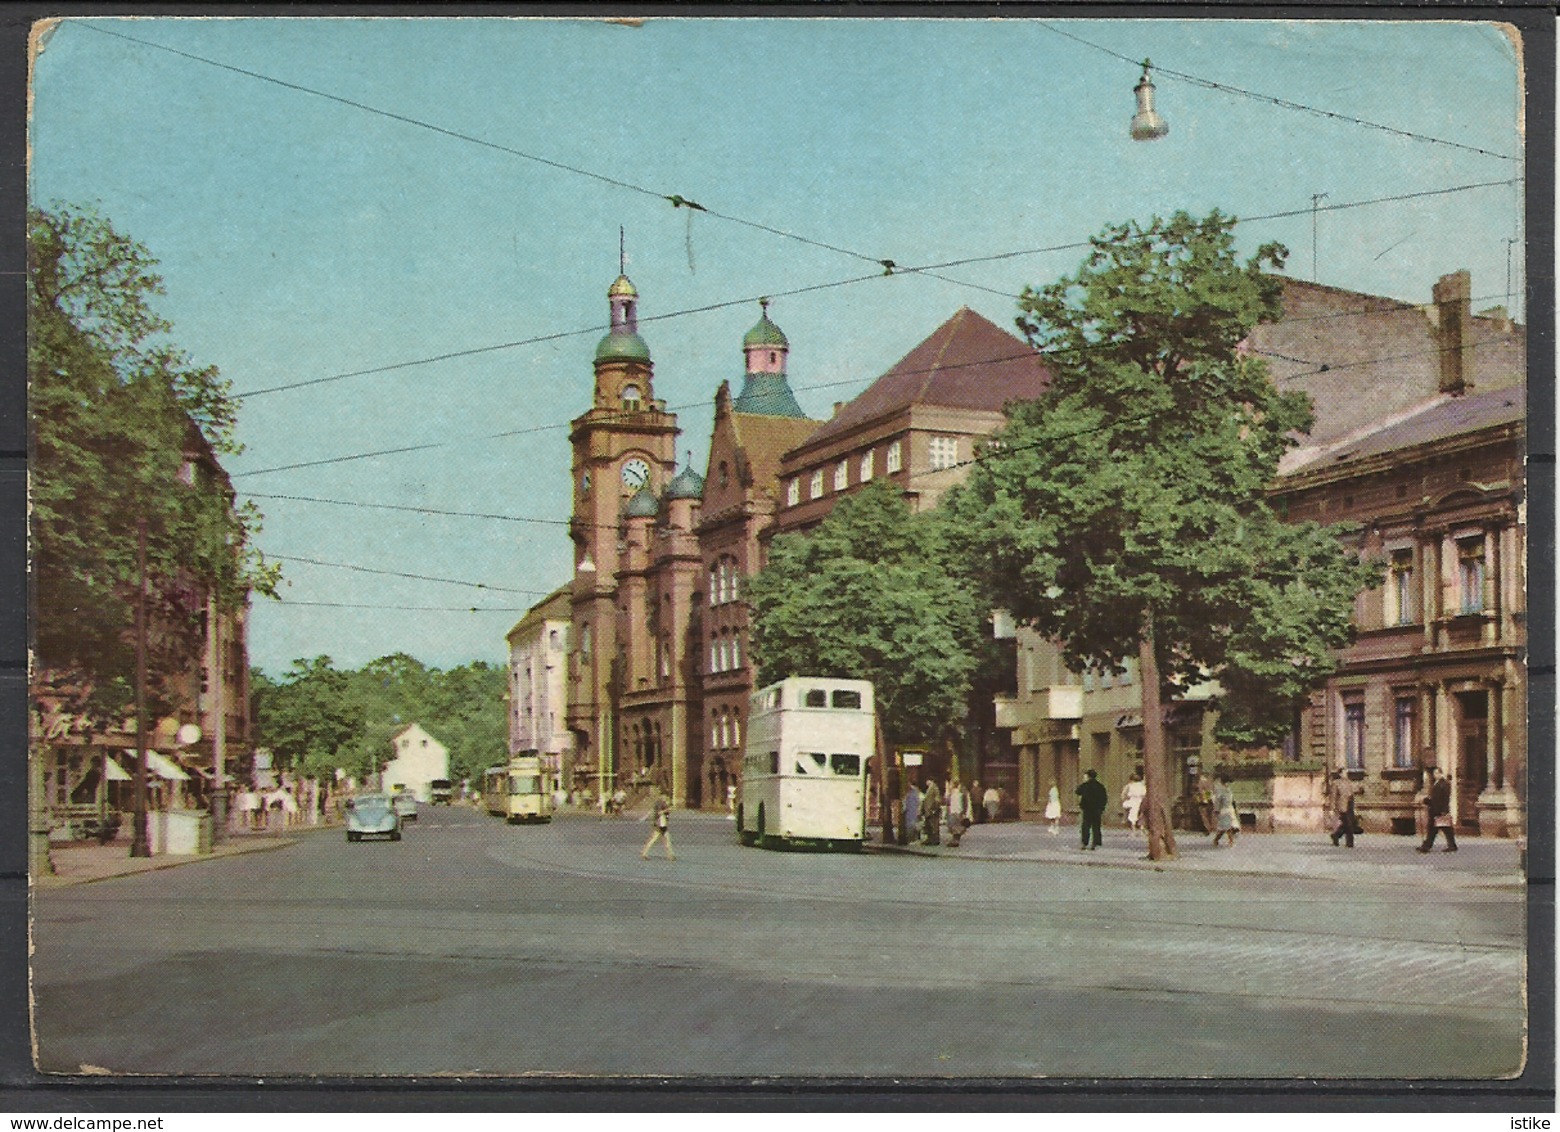 Germany, DR,  Rathaus In Pankow, Old Double Decker, 1964 - Pankow